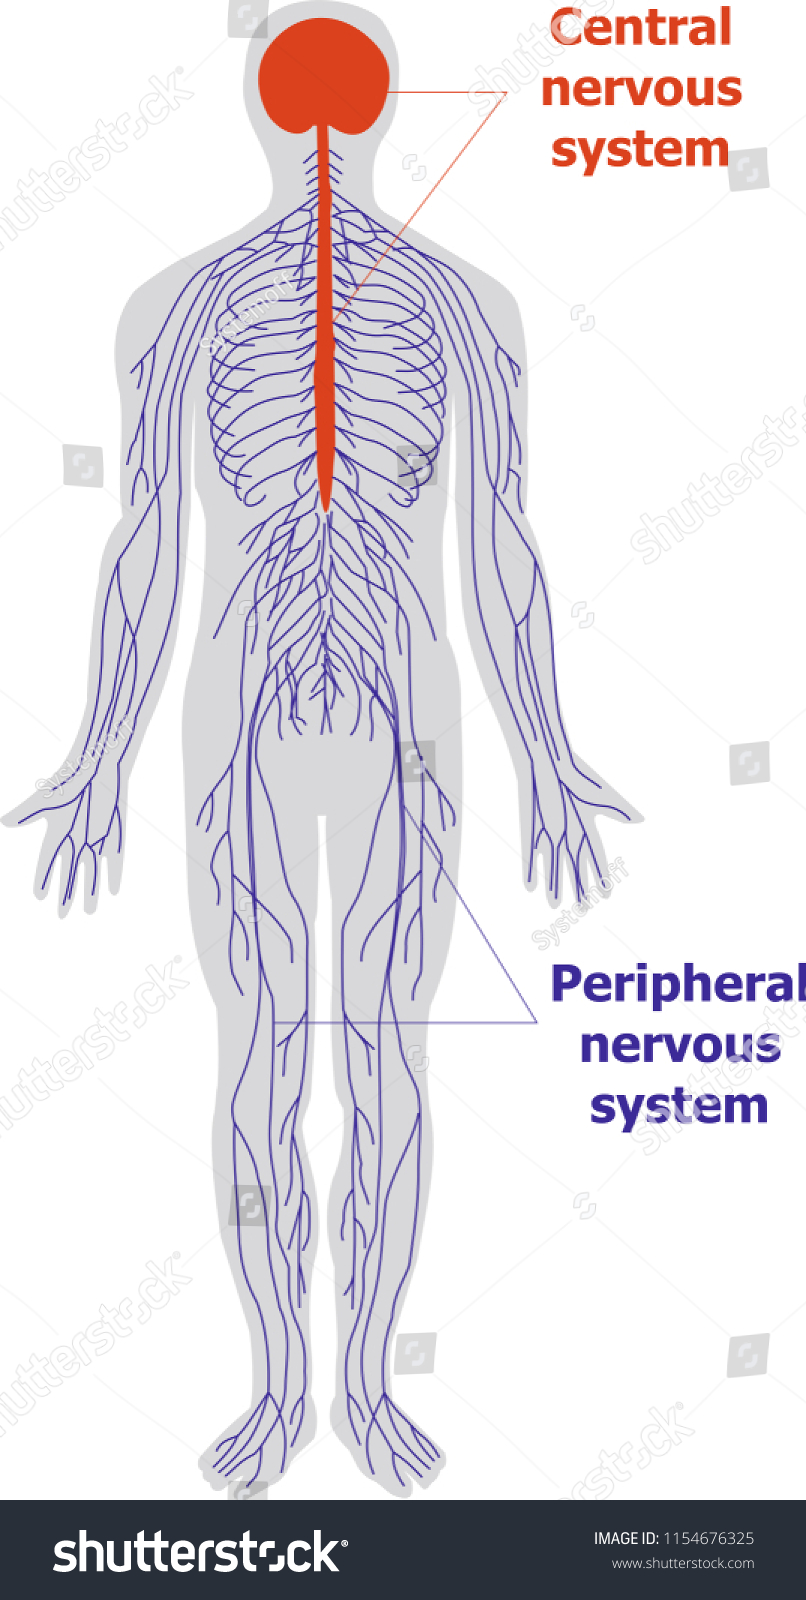 Anatomy of the nervous system #1154676325